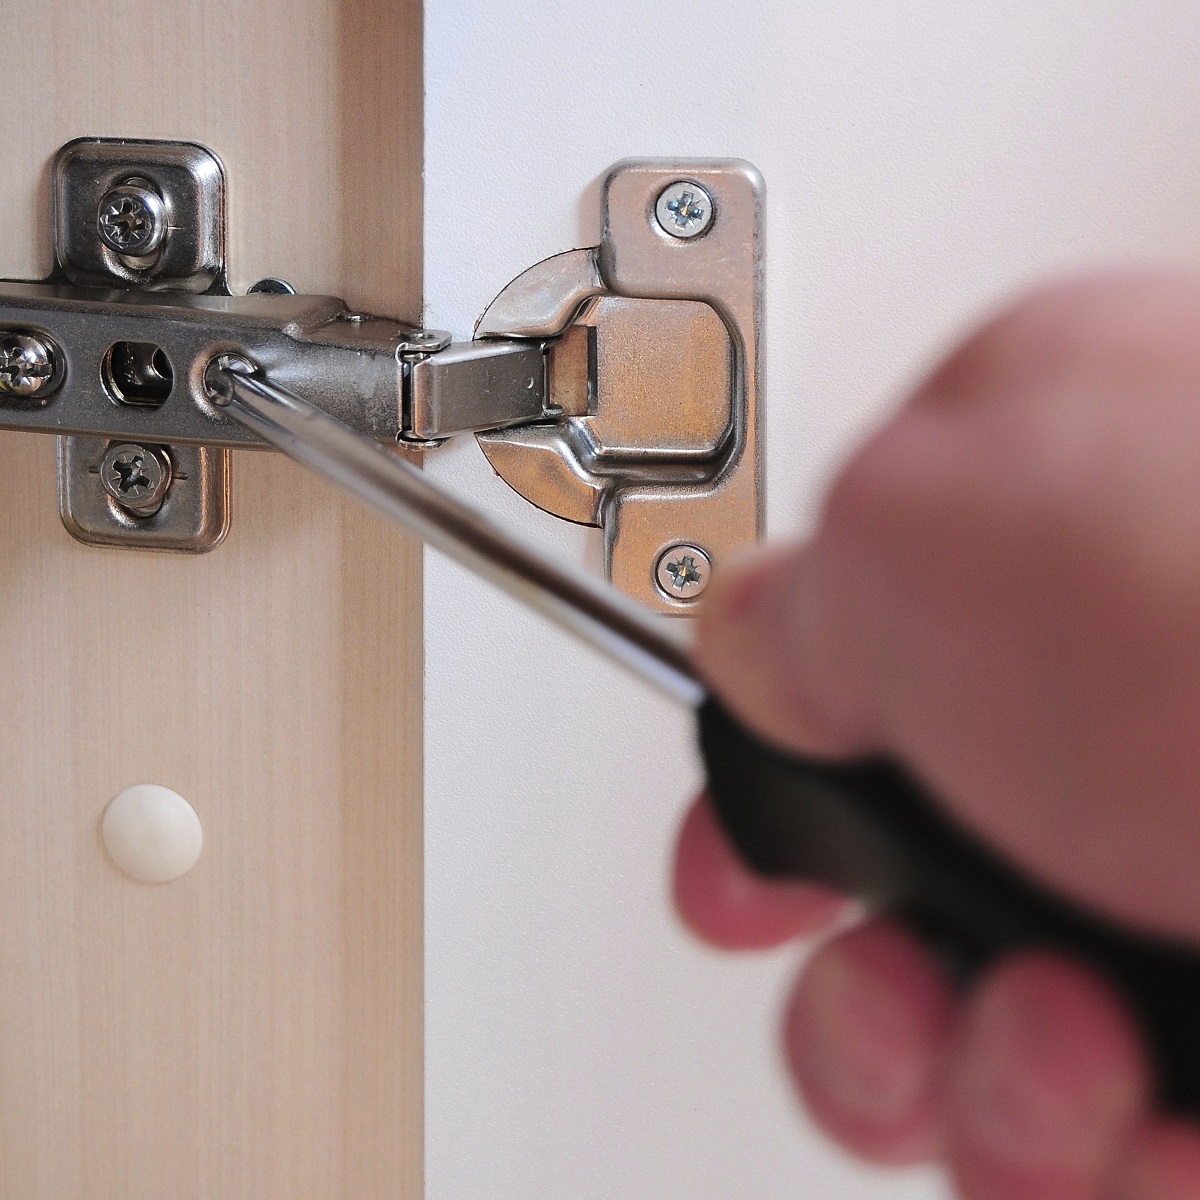 How To Install Hinges On Cabinet Doors